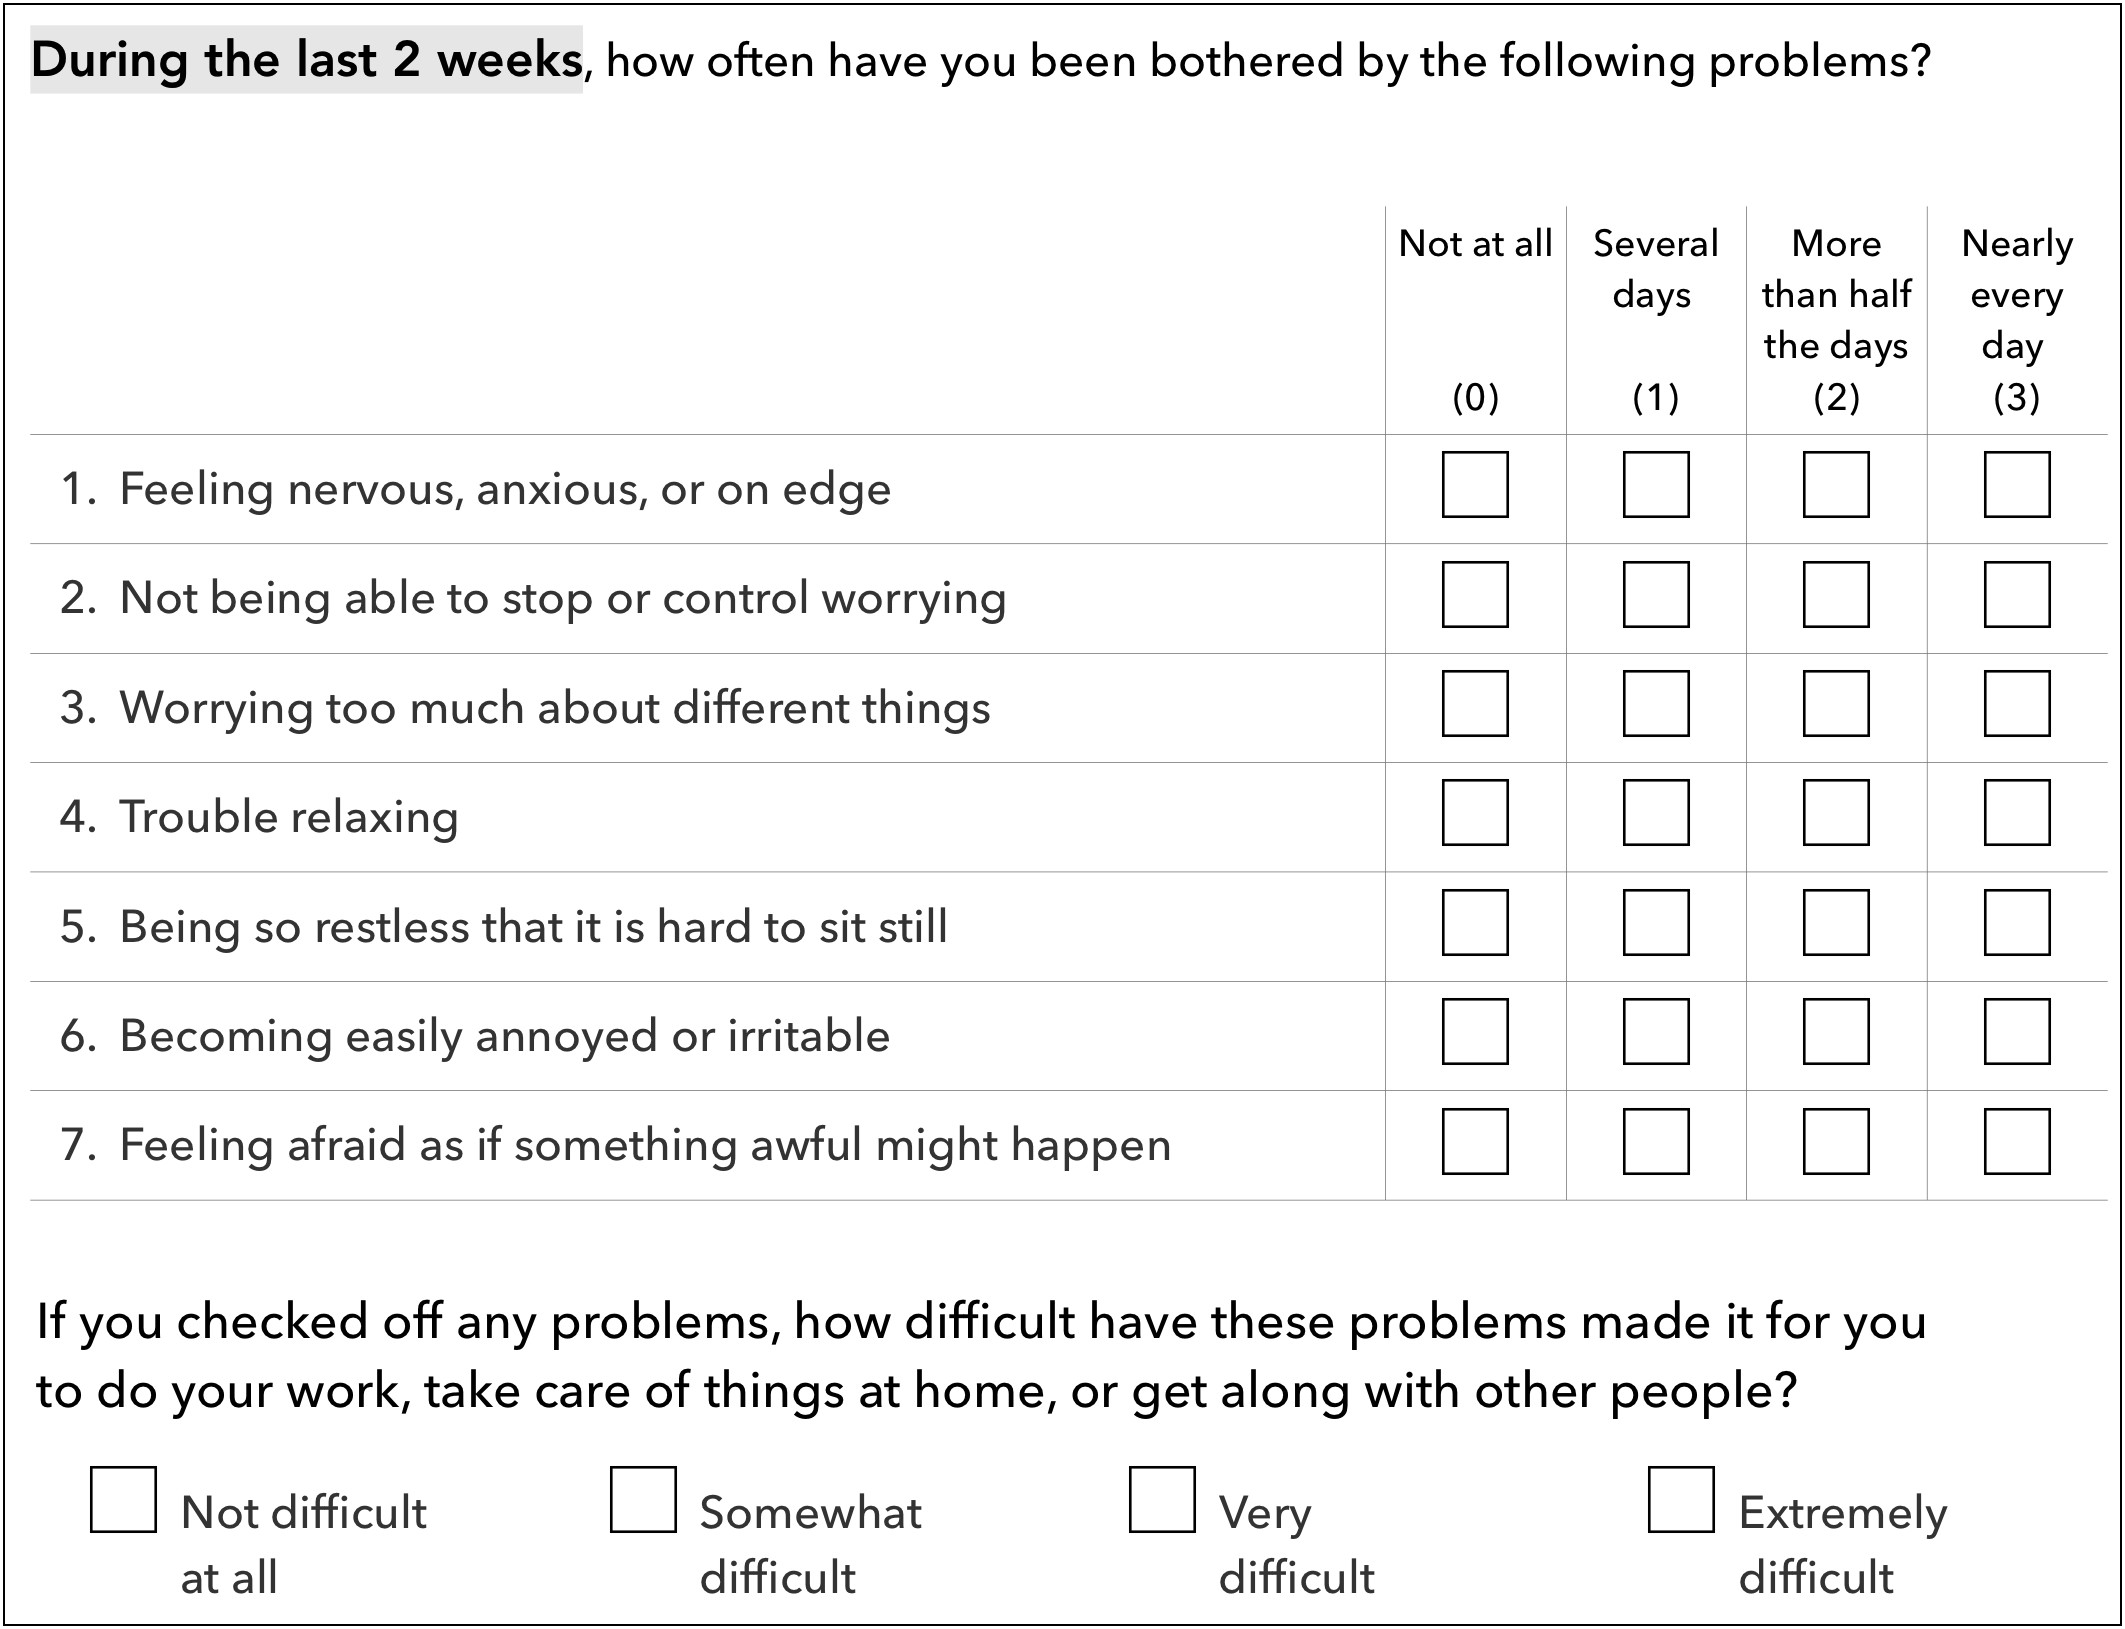 Figure 1: Generalized Anxiety Disorder 7-item self-report scale (GAD-7).